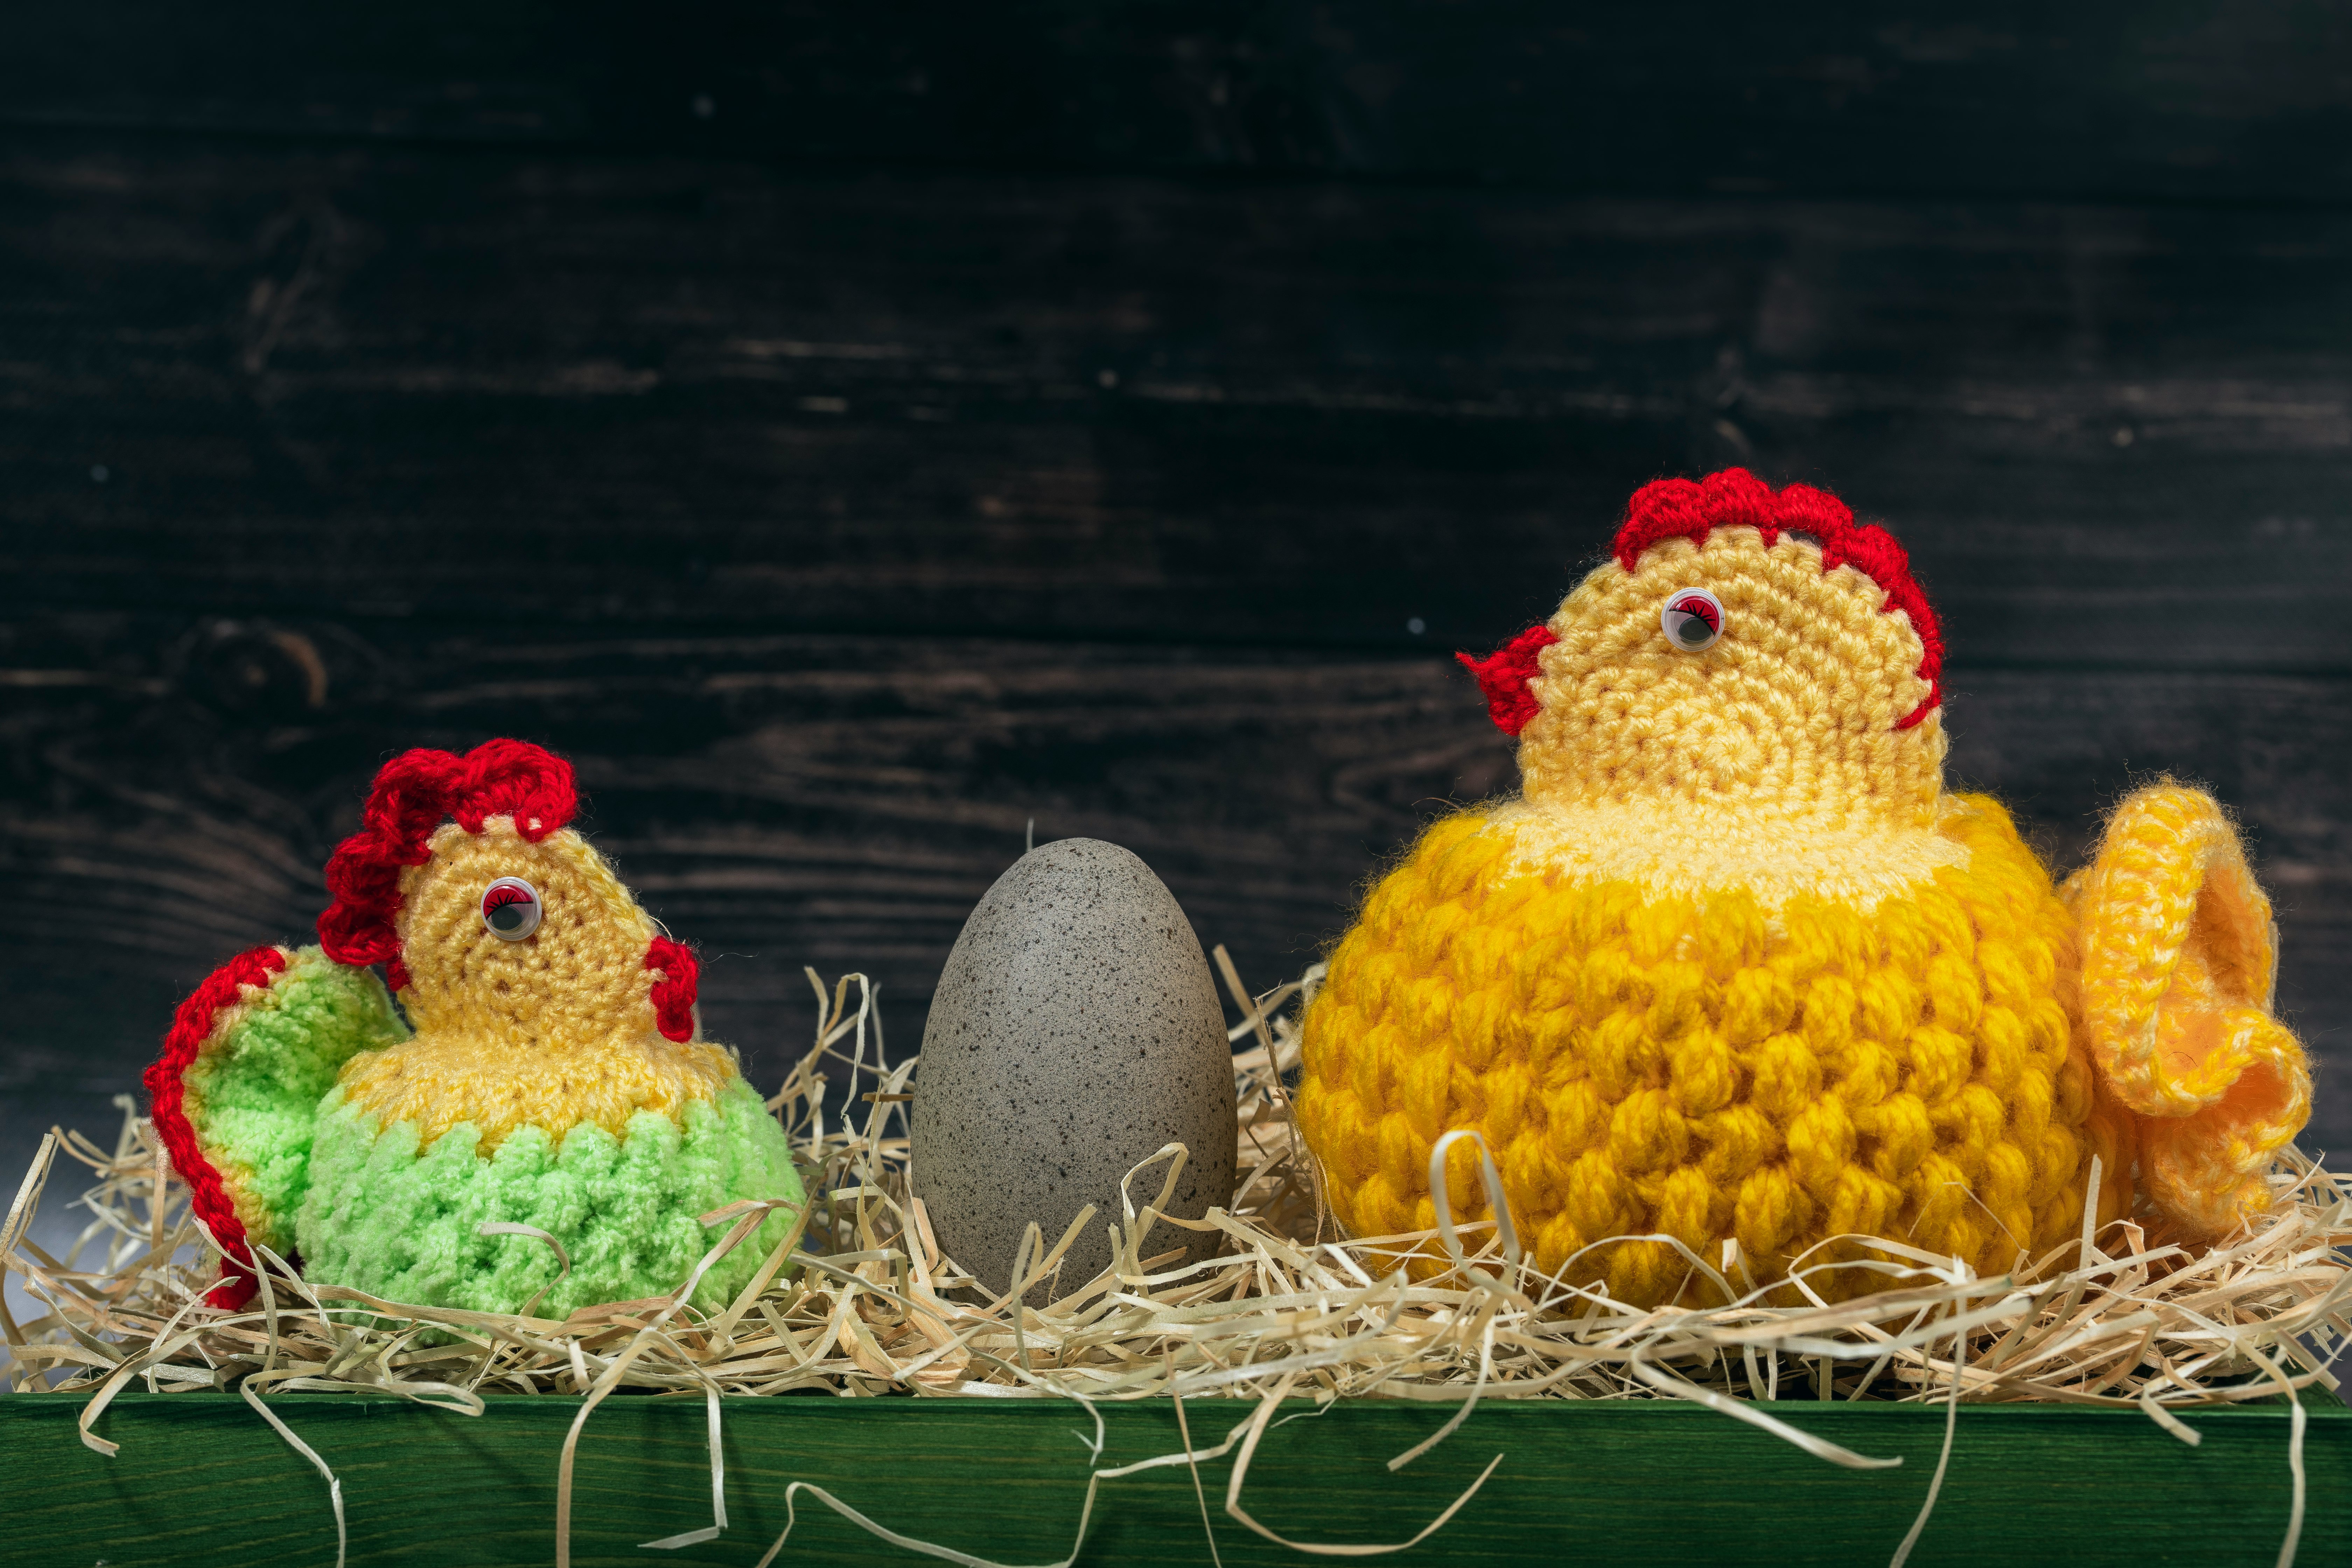 Two handmade knitted woolen Easter chickens with rock egg in front of a wooden wall. Easter time.